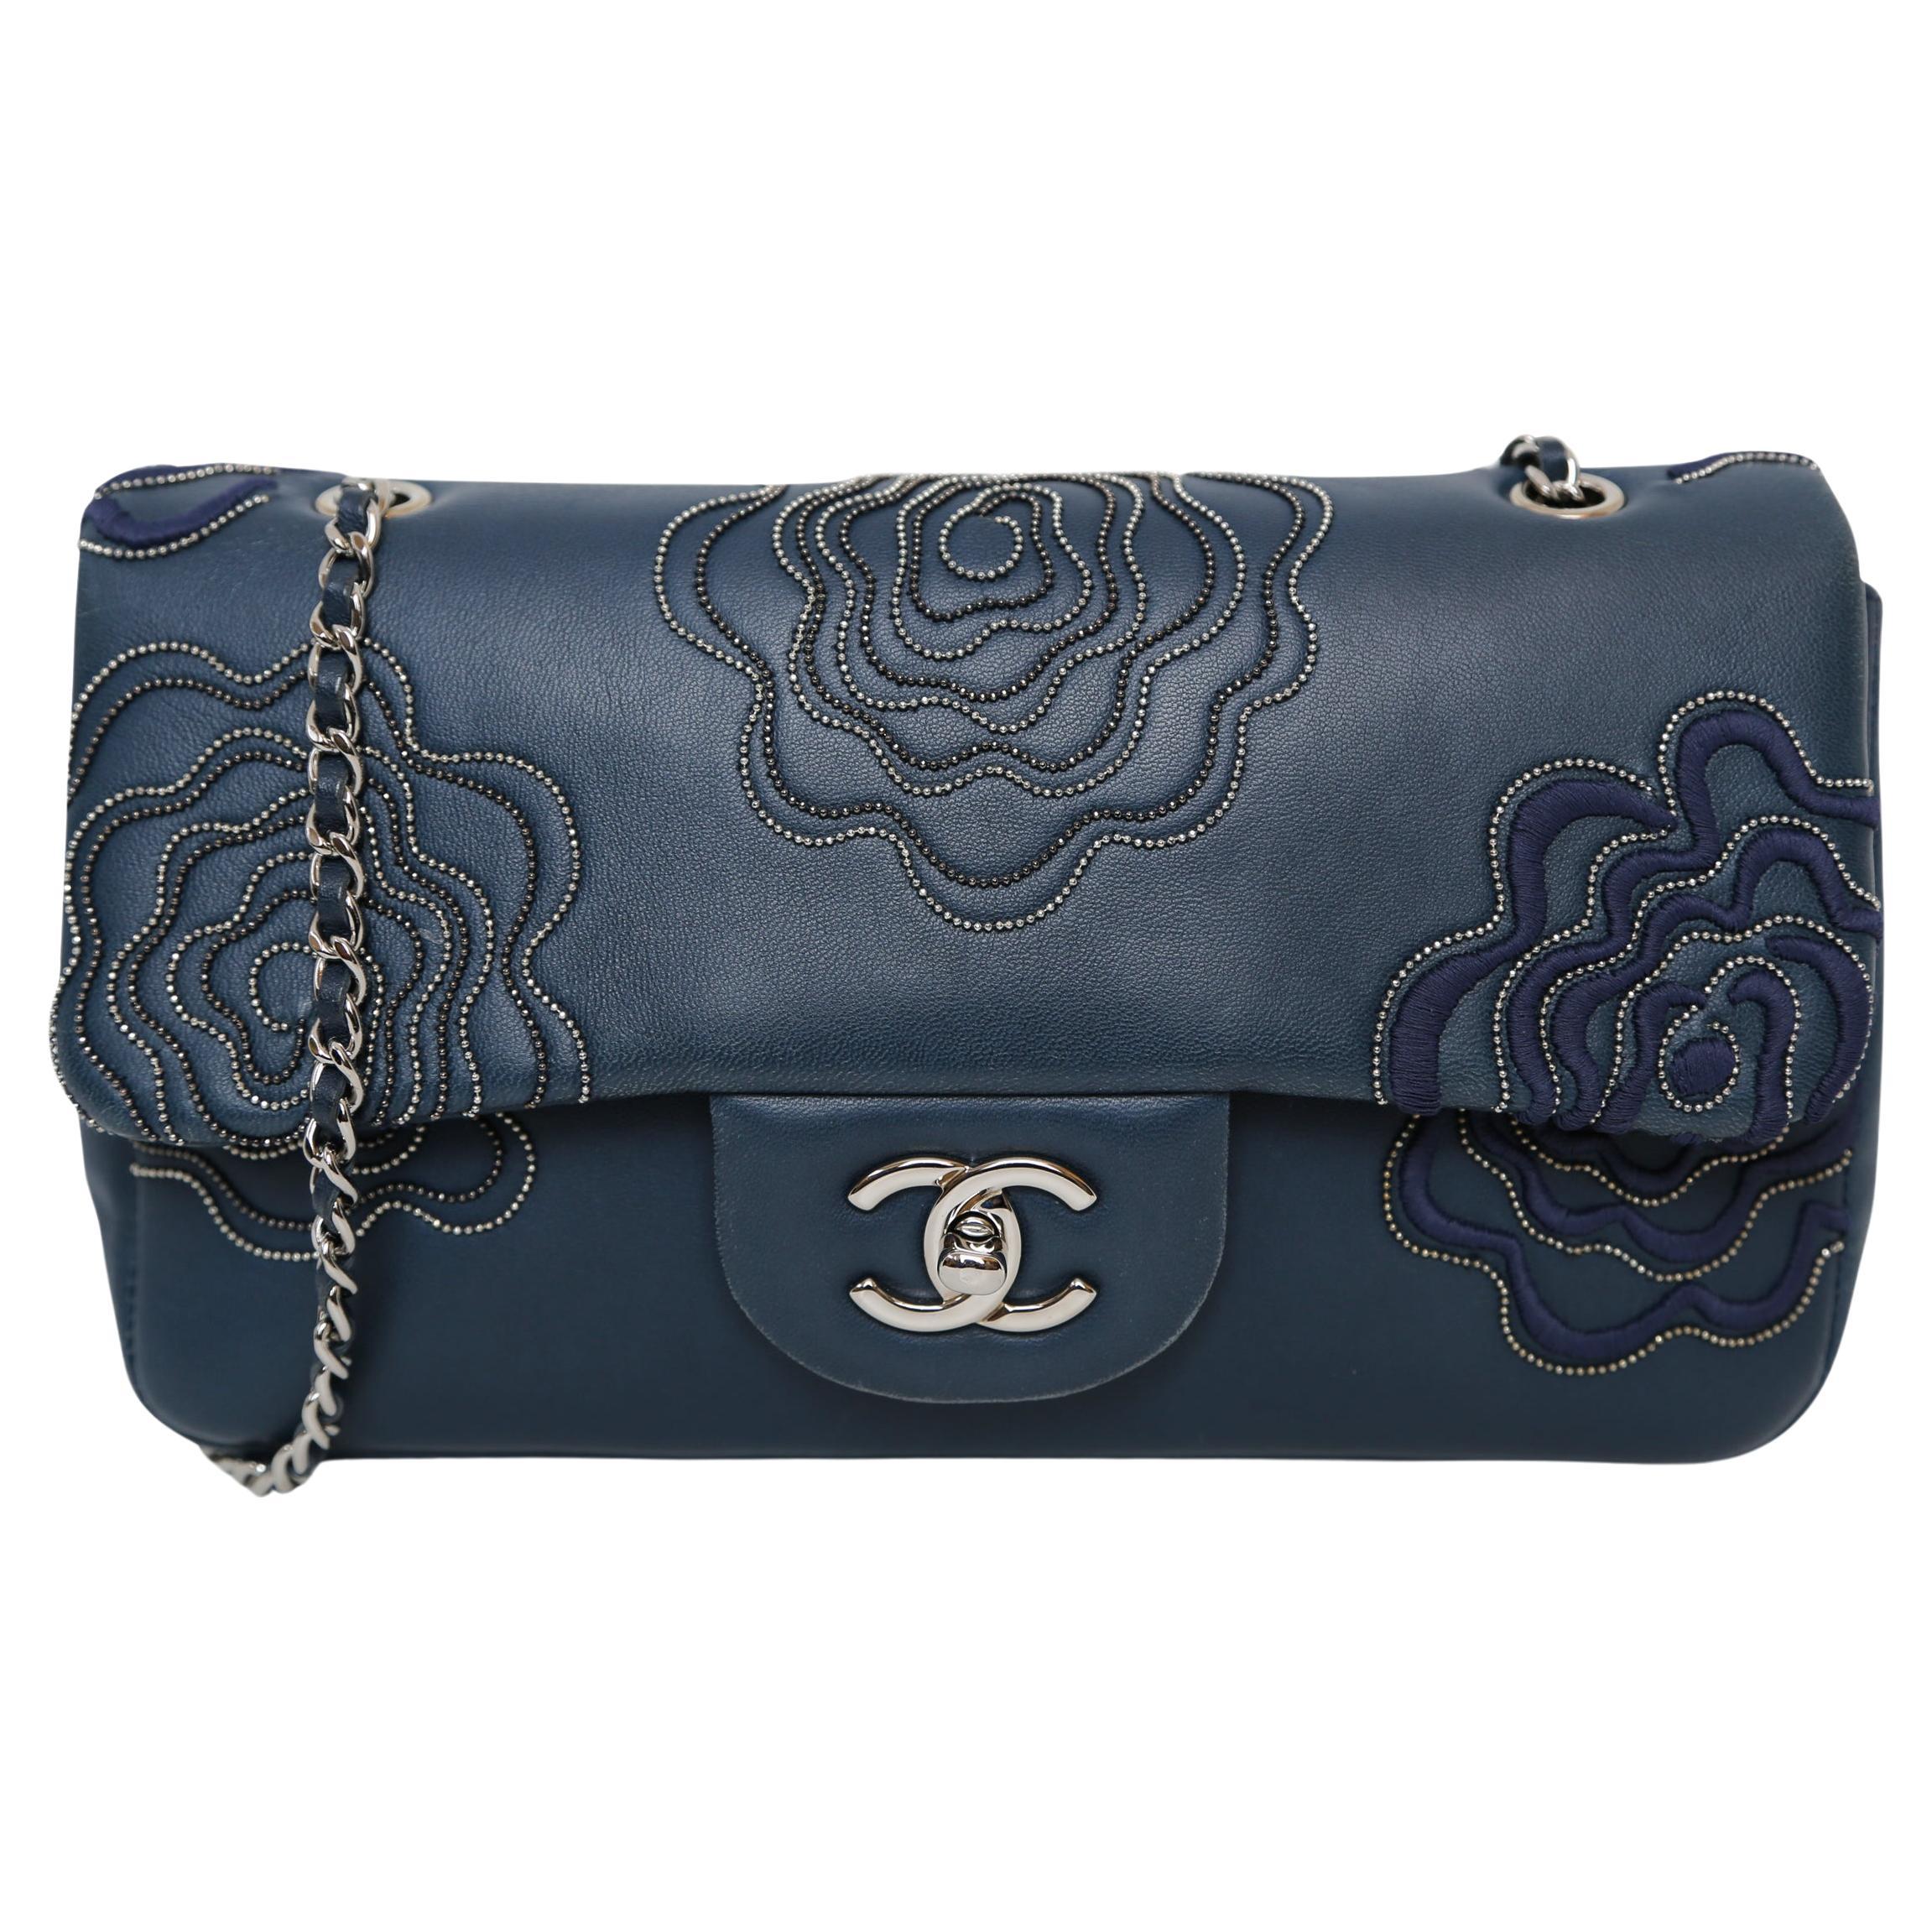 Chanel Lambskin Embroidered Camelia Flap Bag